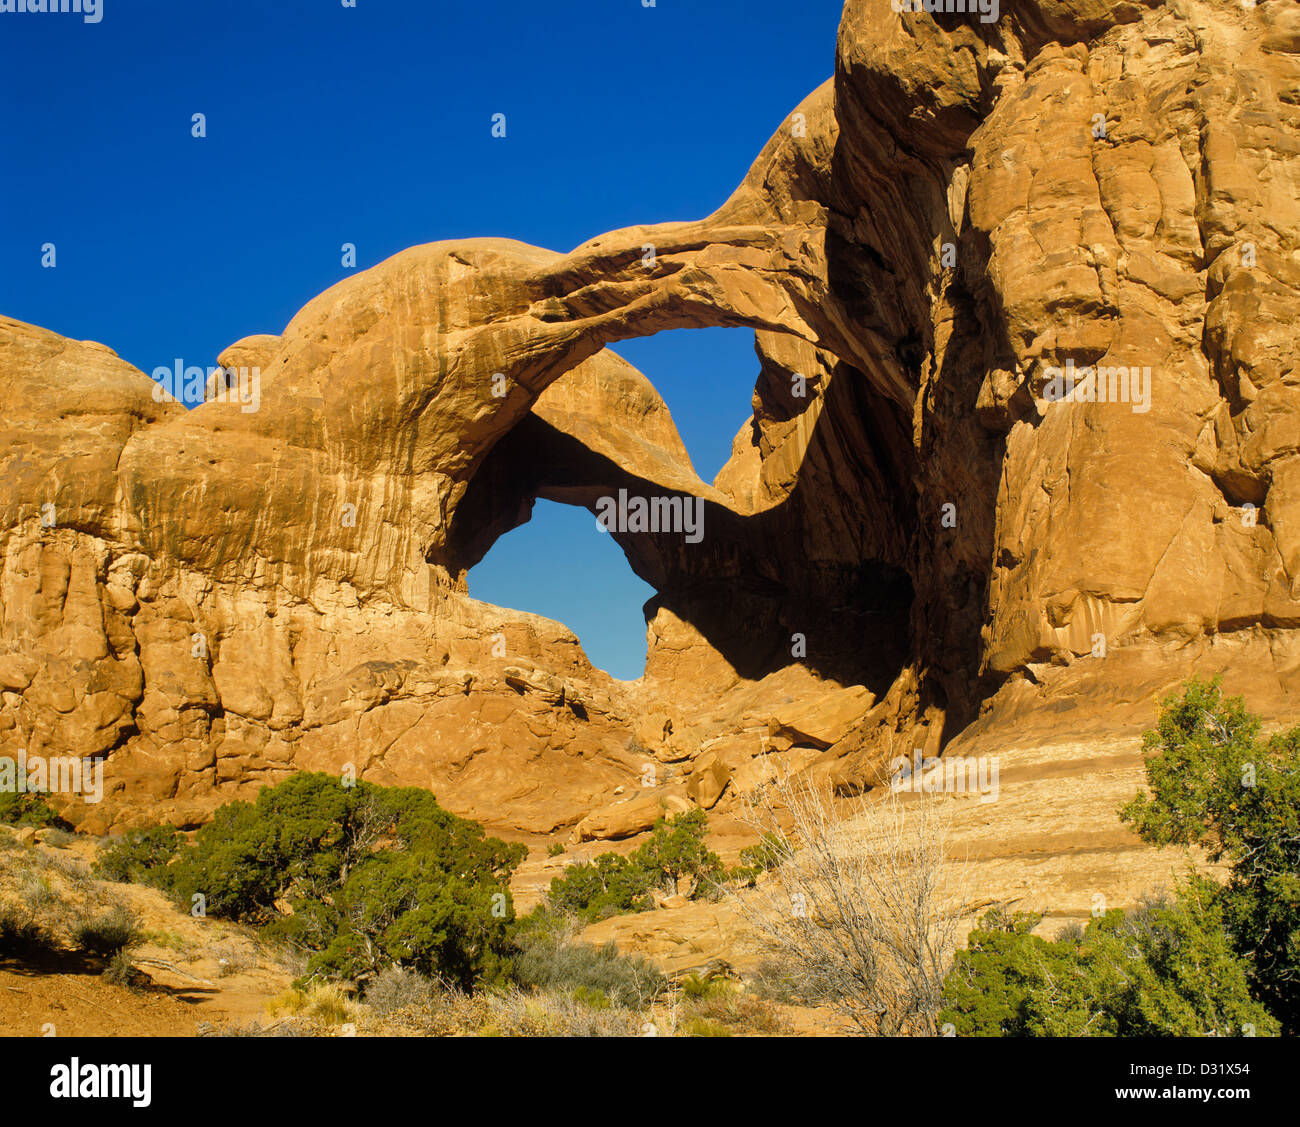 USA, Utah, Arches National Park, Double Arch Stock Photo